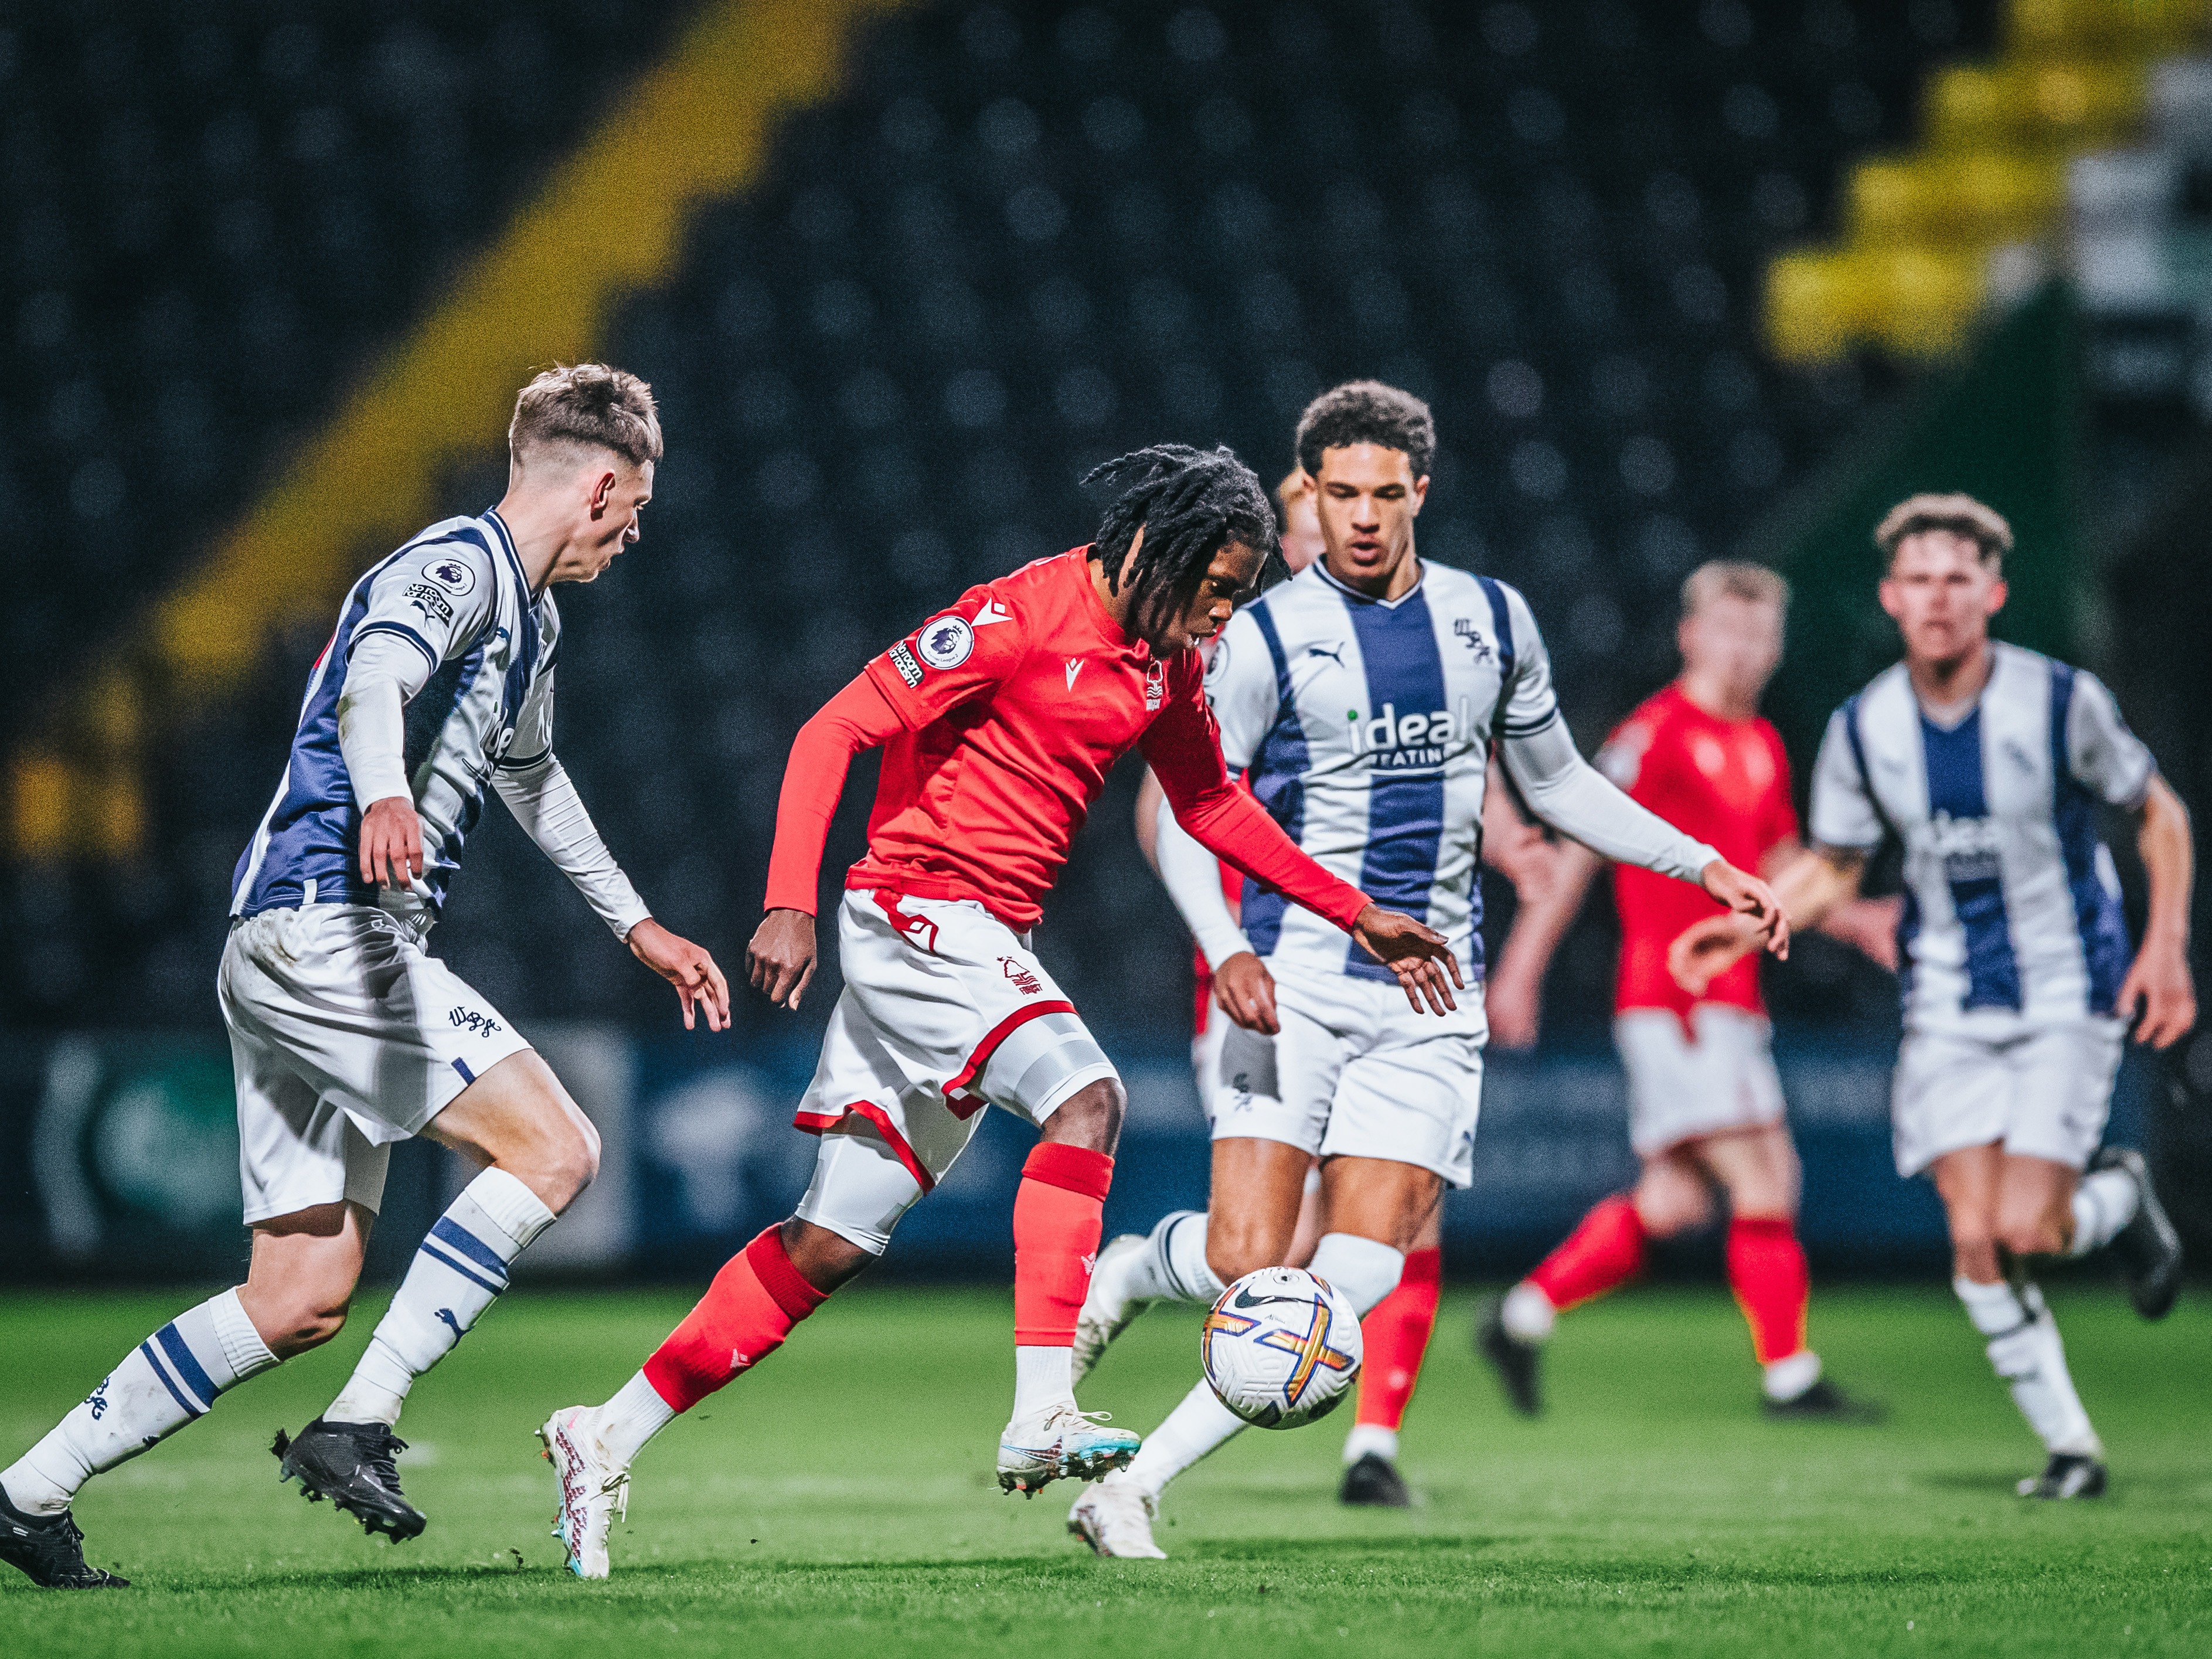 Nottingham Forest and Albion PL2 players battle for the ball